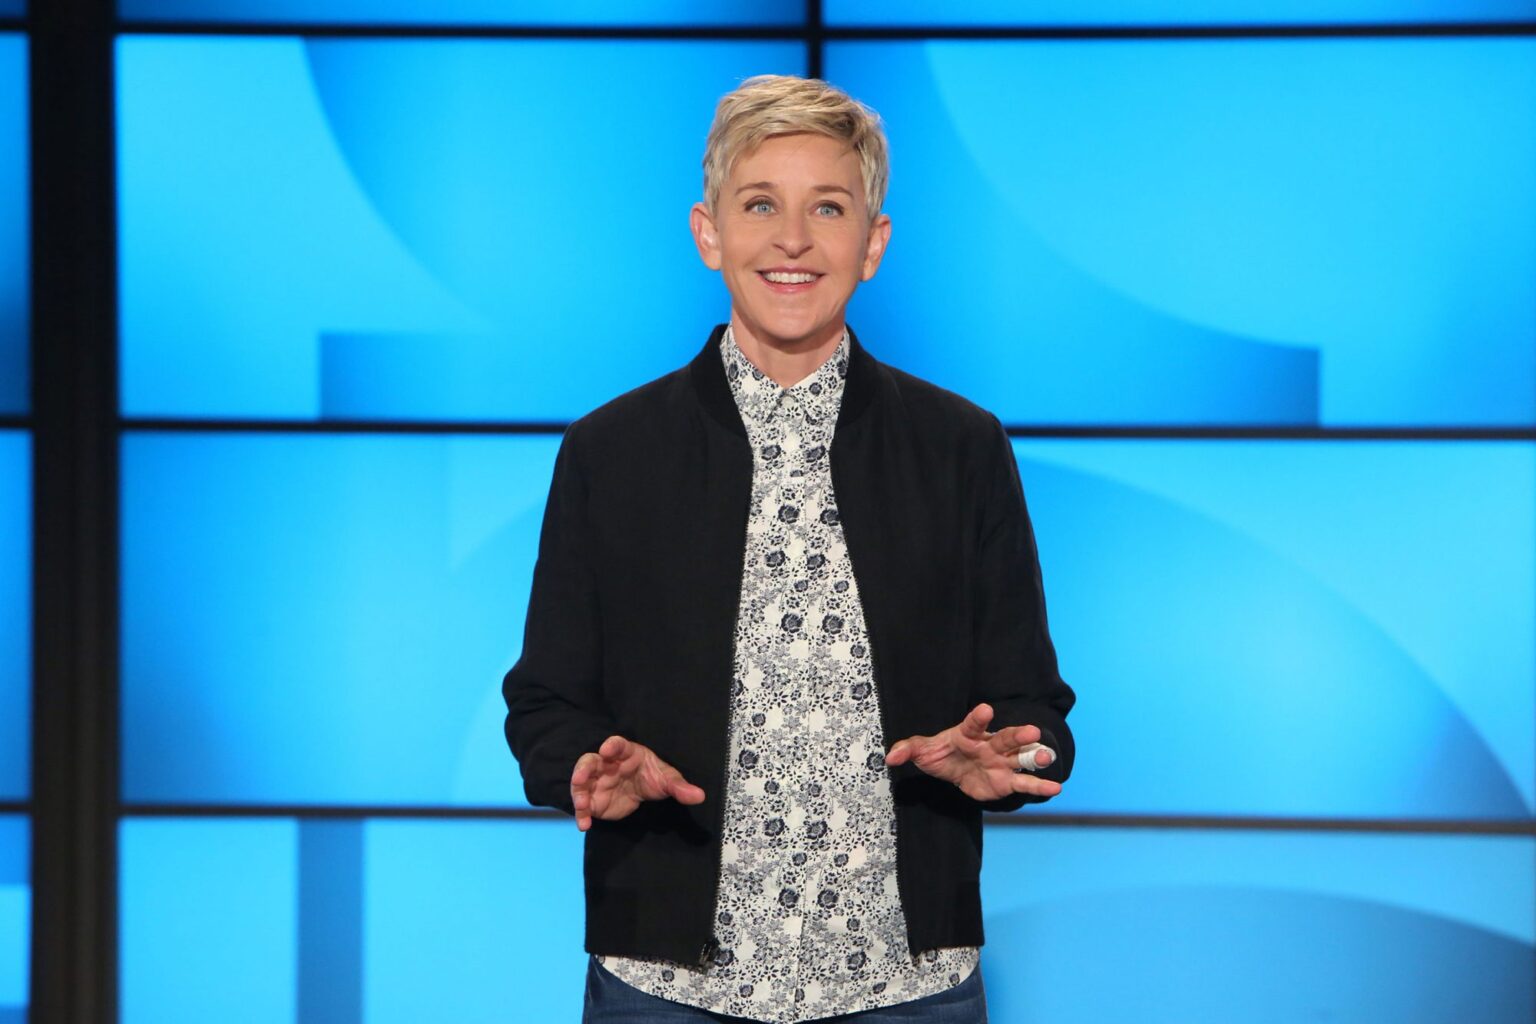 Here are five moments from 'The Ellen DeGeneres Show' that’s making us feel different in light of everything we’ve learned recently.